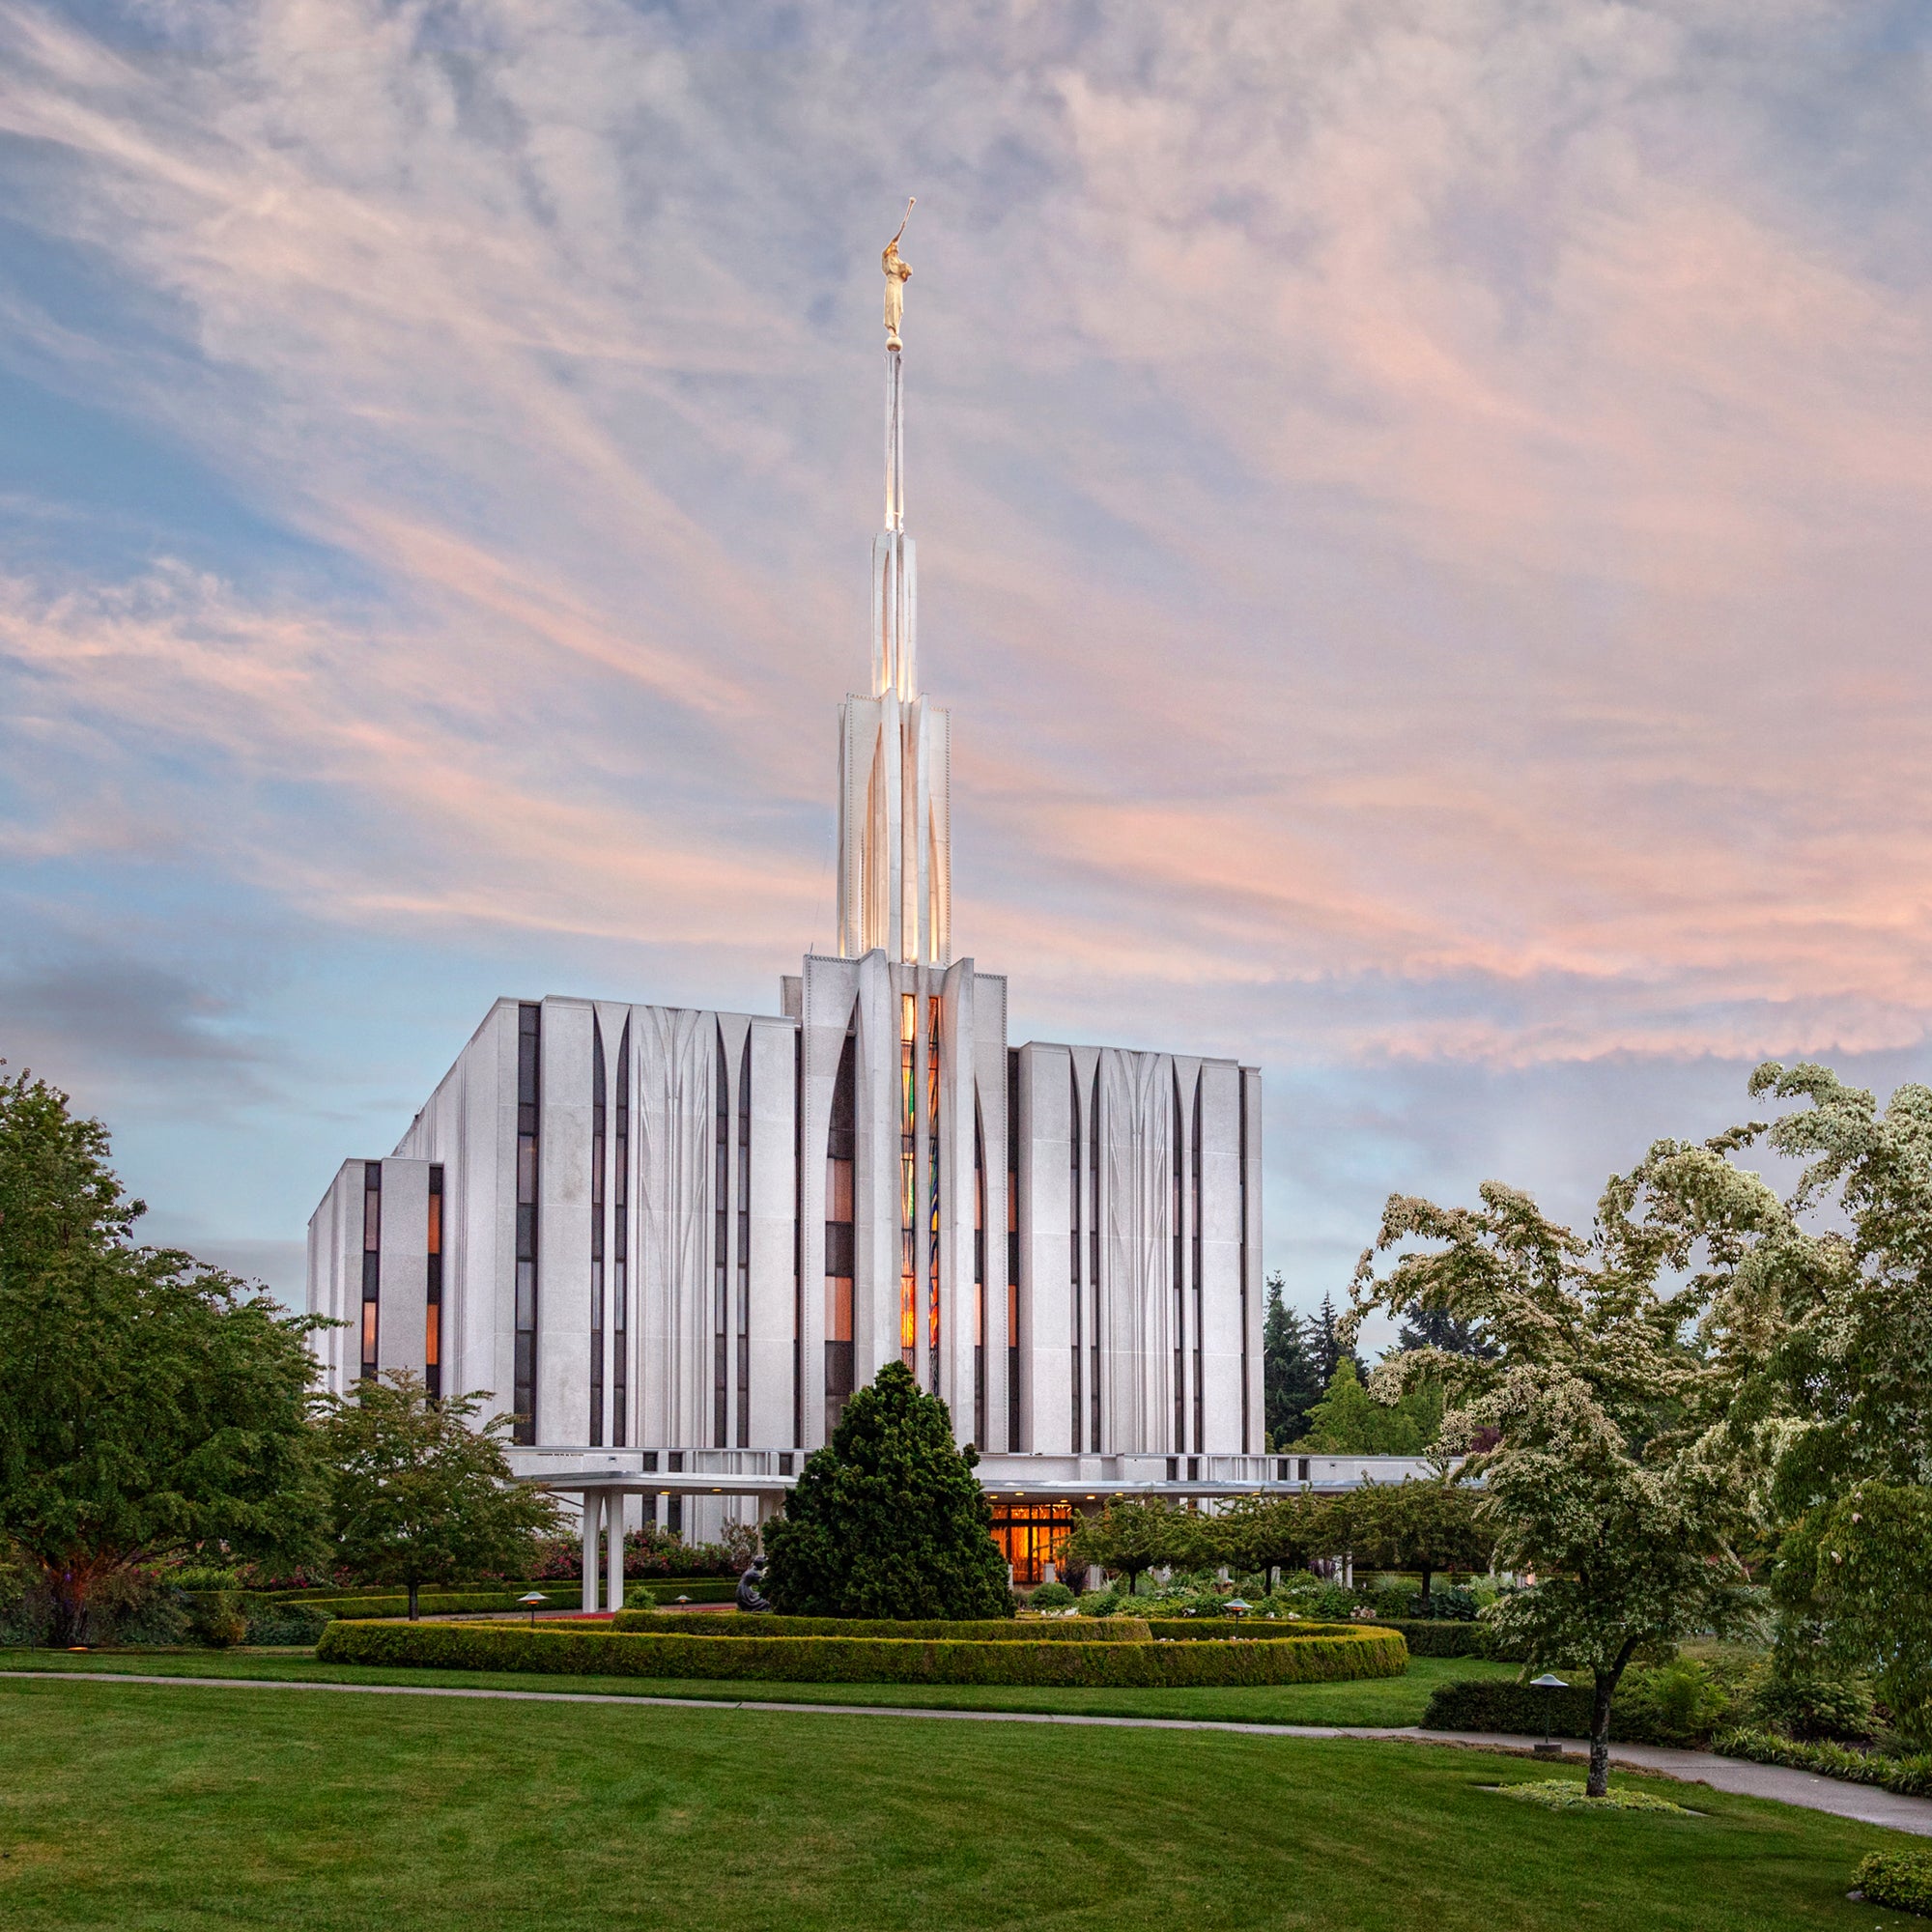 Seattle Temple - Springtime by Robert A Boyd